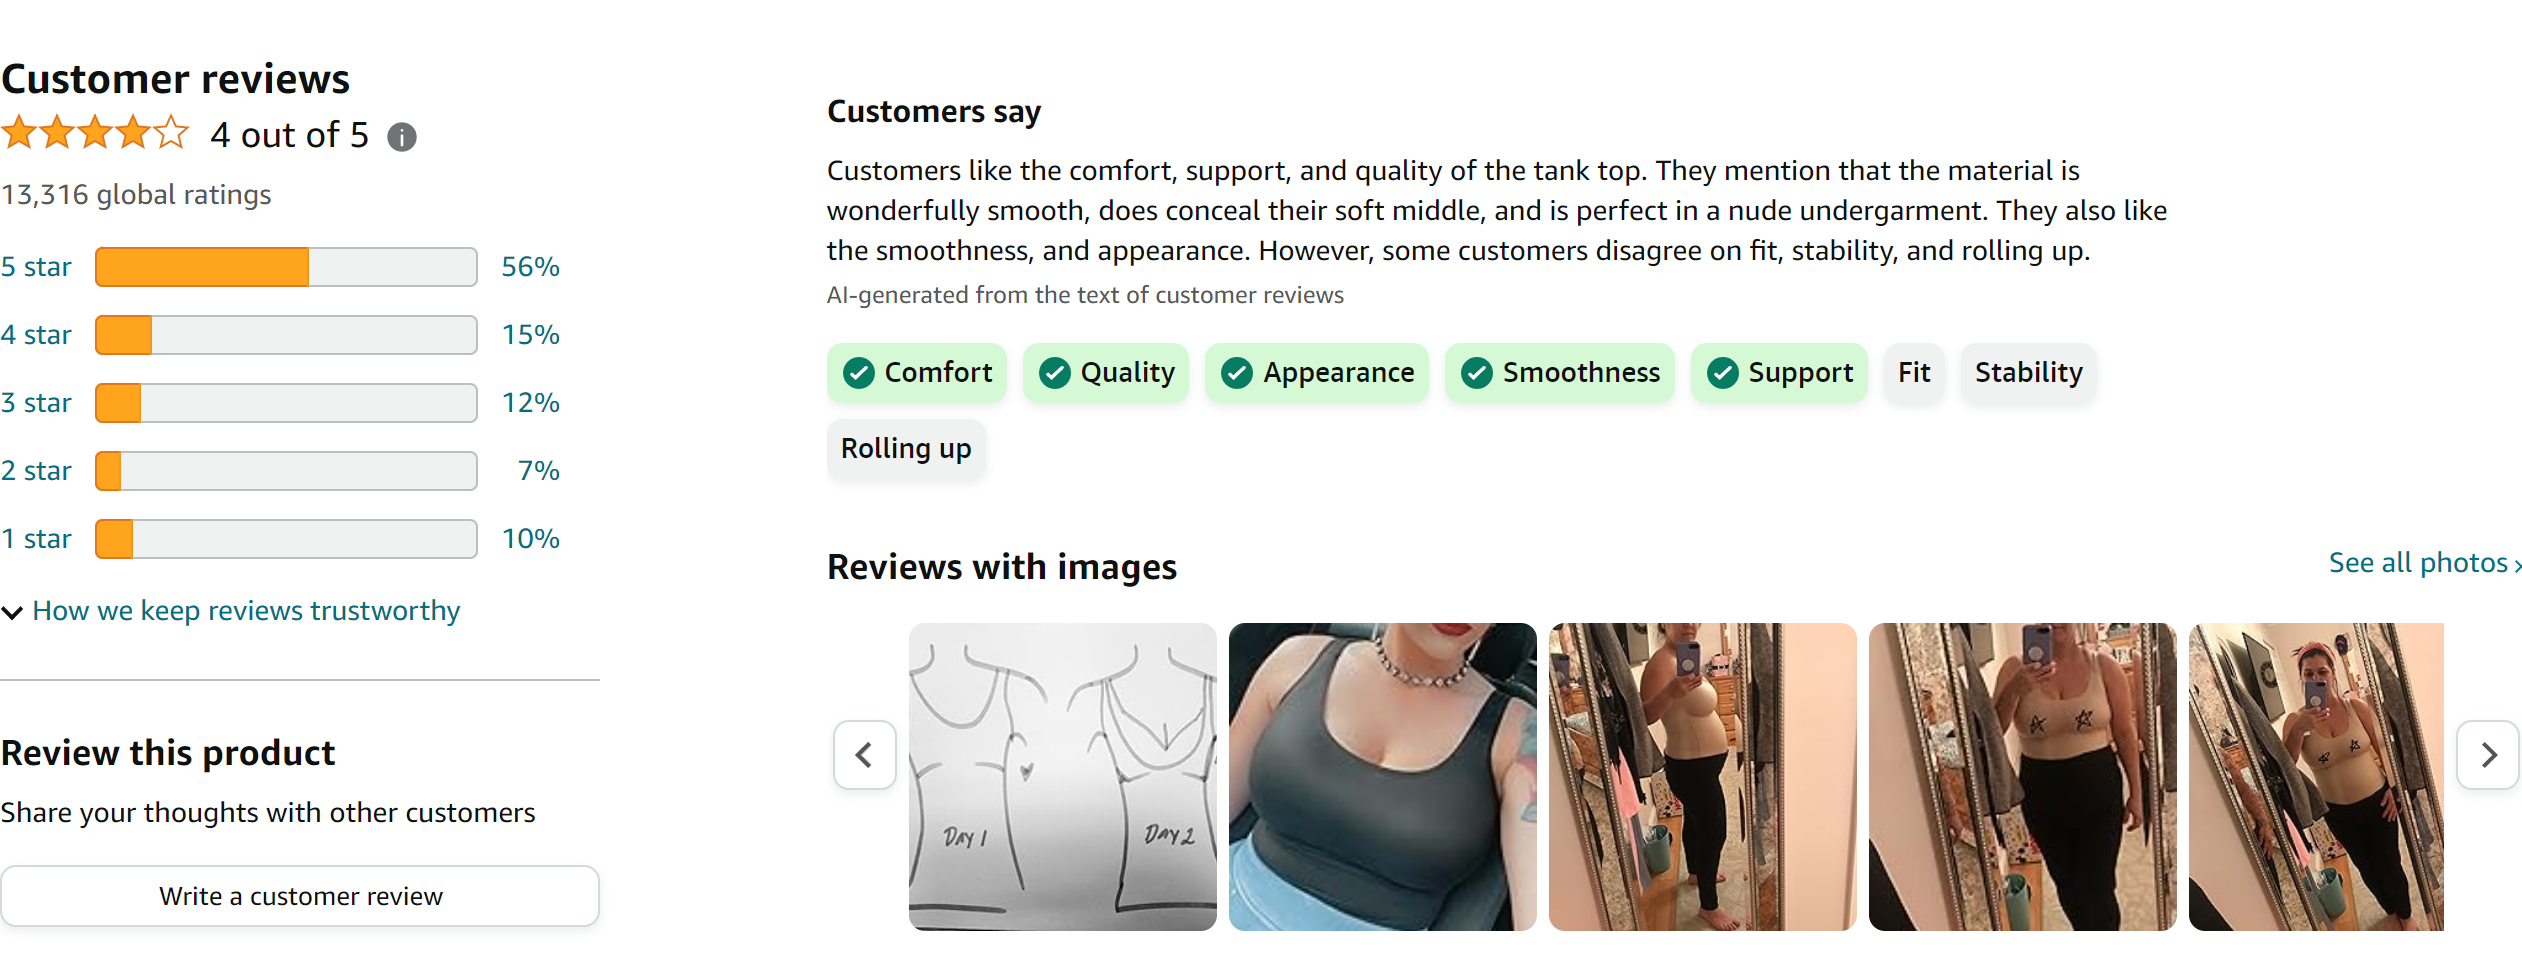 Maidenform Women's Comfort Devotion Shapewear Tank Top, Firm Control Smoothing Cami from Amazon Reviews (screenshot taken on 2024-2-21)